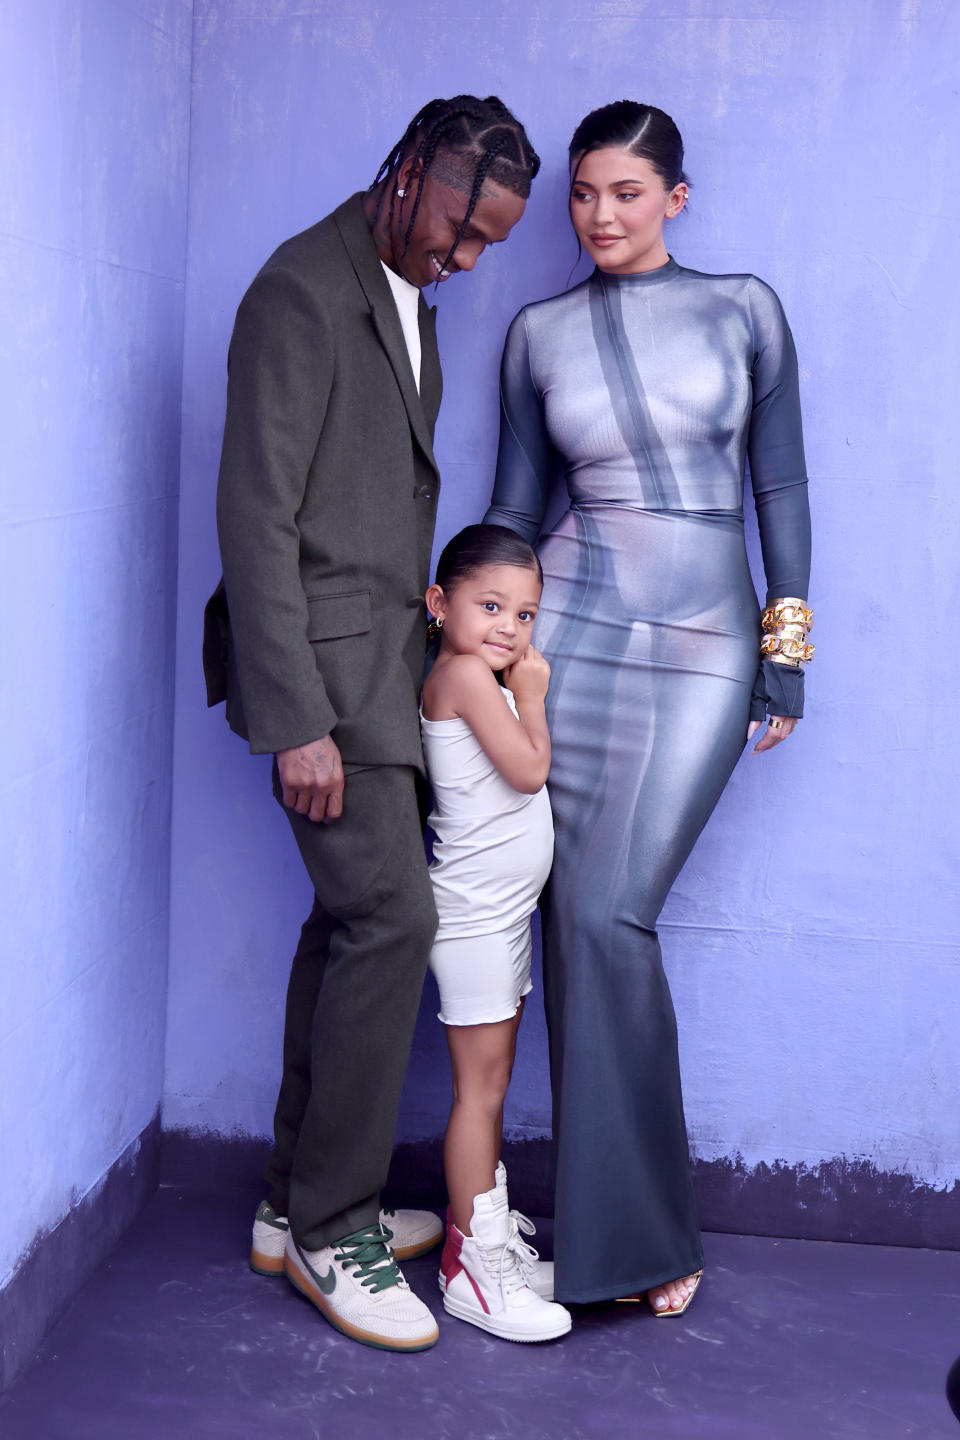 LAS VEGAS, NEVADA - MAY 15: (L-R) Travis Scott, Stormi Webster, and Kylie Jenner attend the 2022 Billboard Music Awards at MGM Grand Garden Arena on May 15, 2022 in Las Vegas, Nevada. (Photo by Matt Winkelmeyer/Getty Images for MRC)